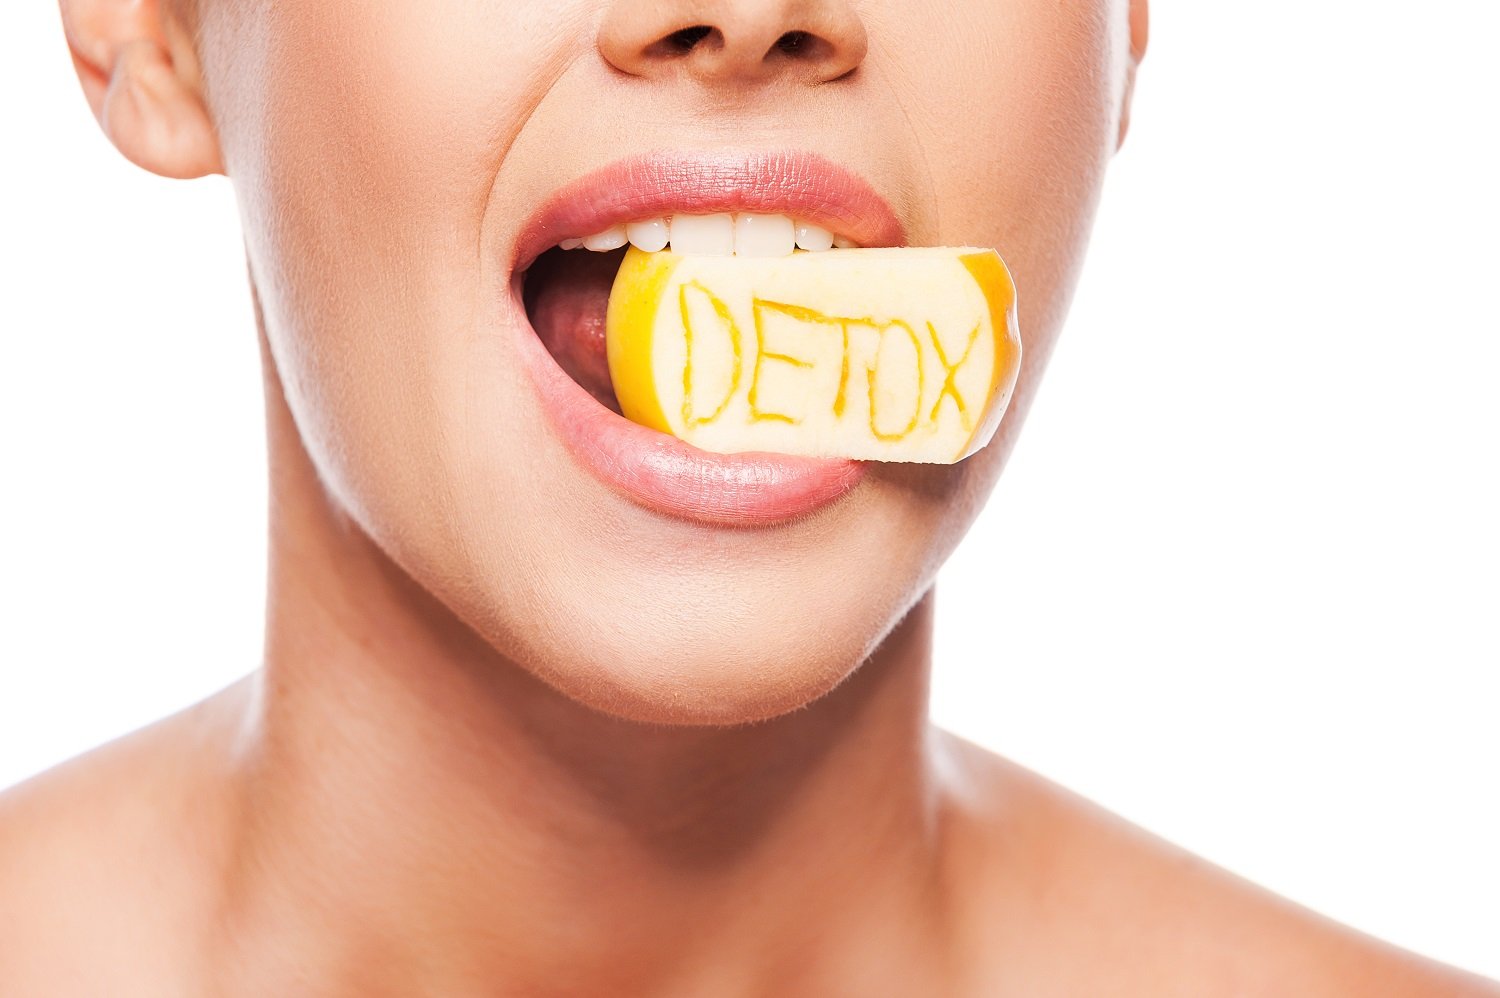 How do you know if your body might need a detox?